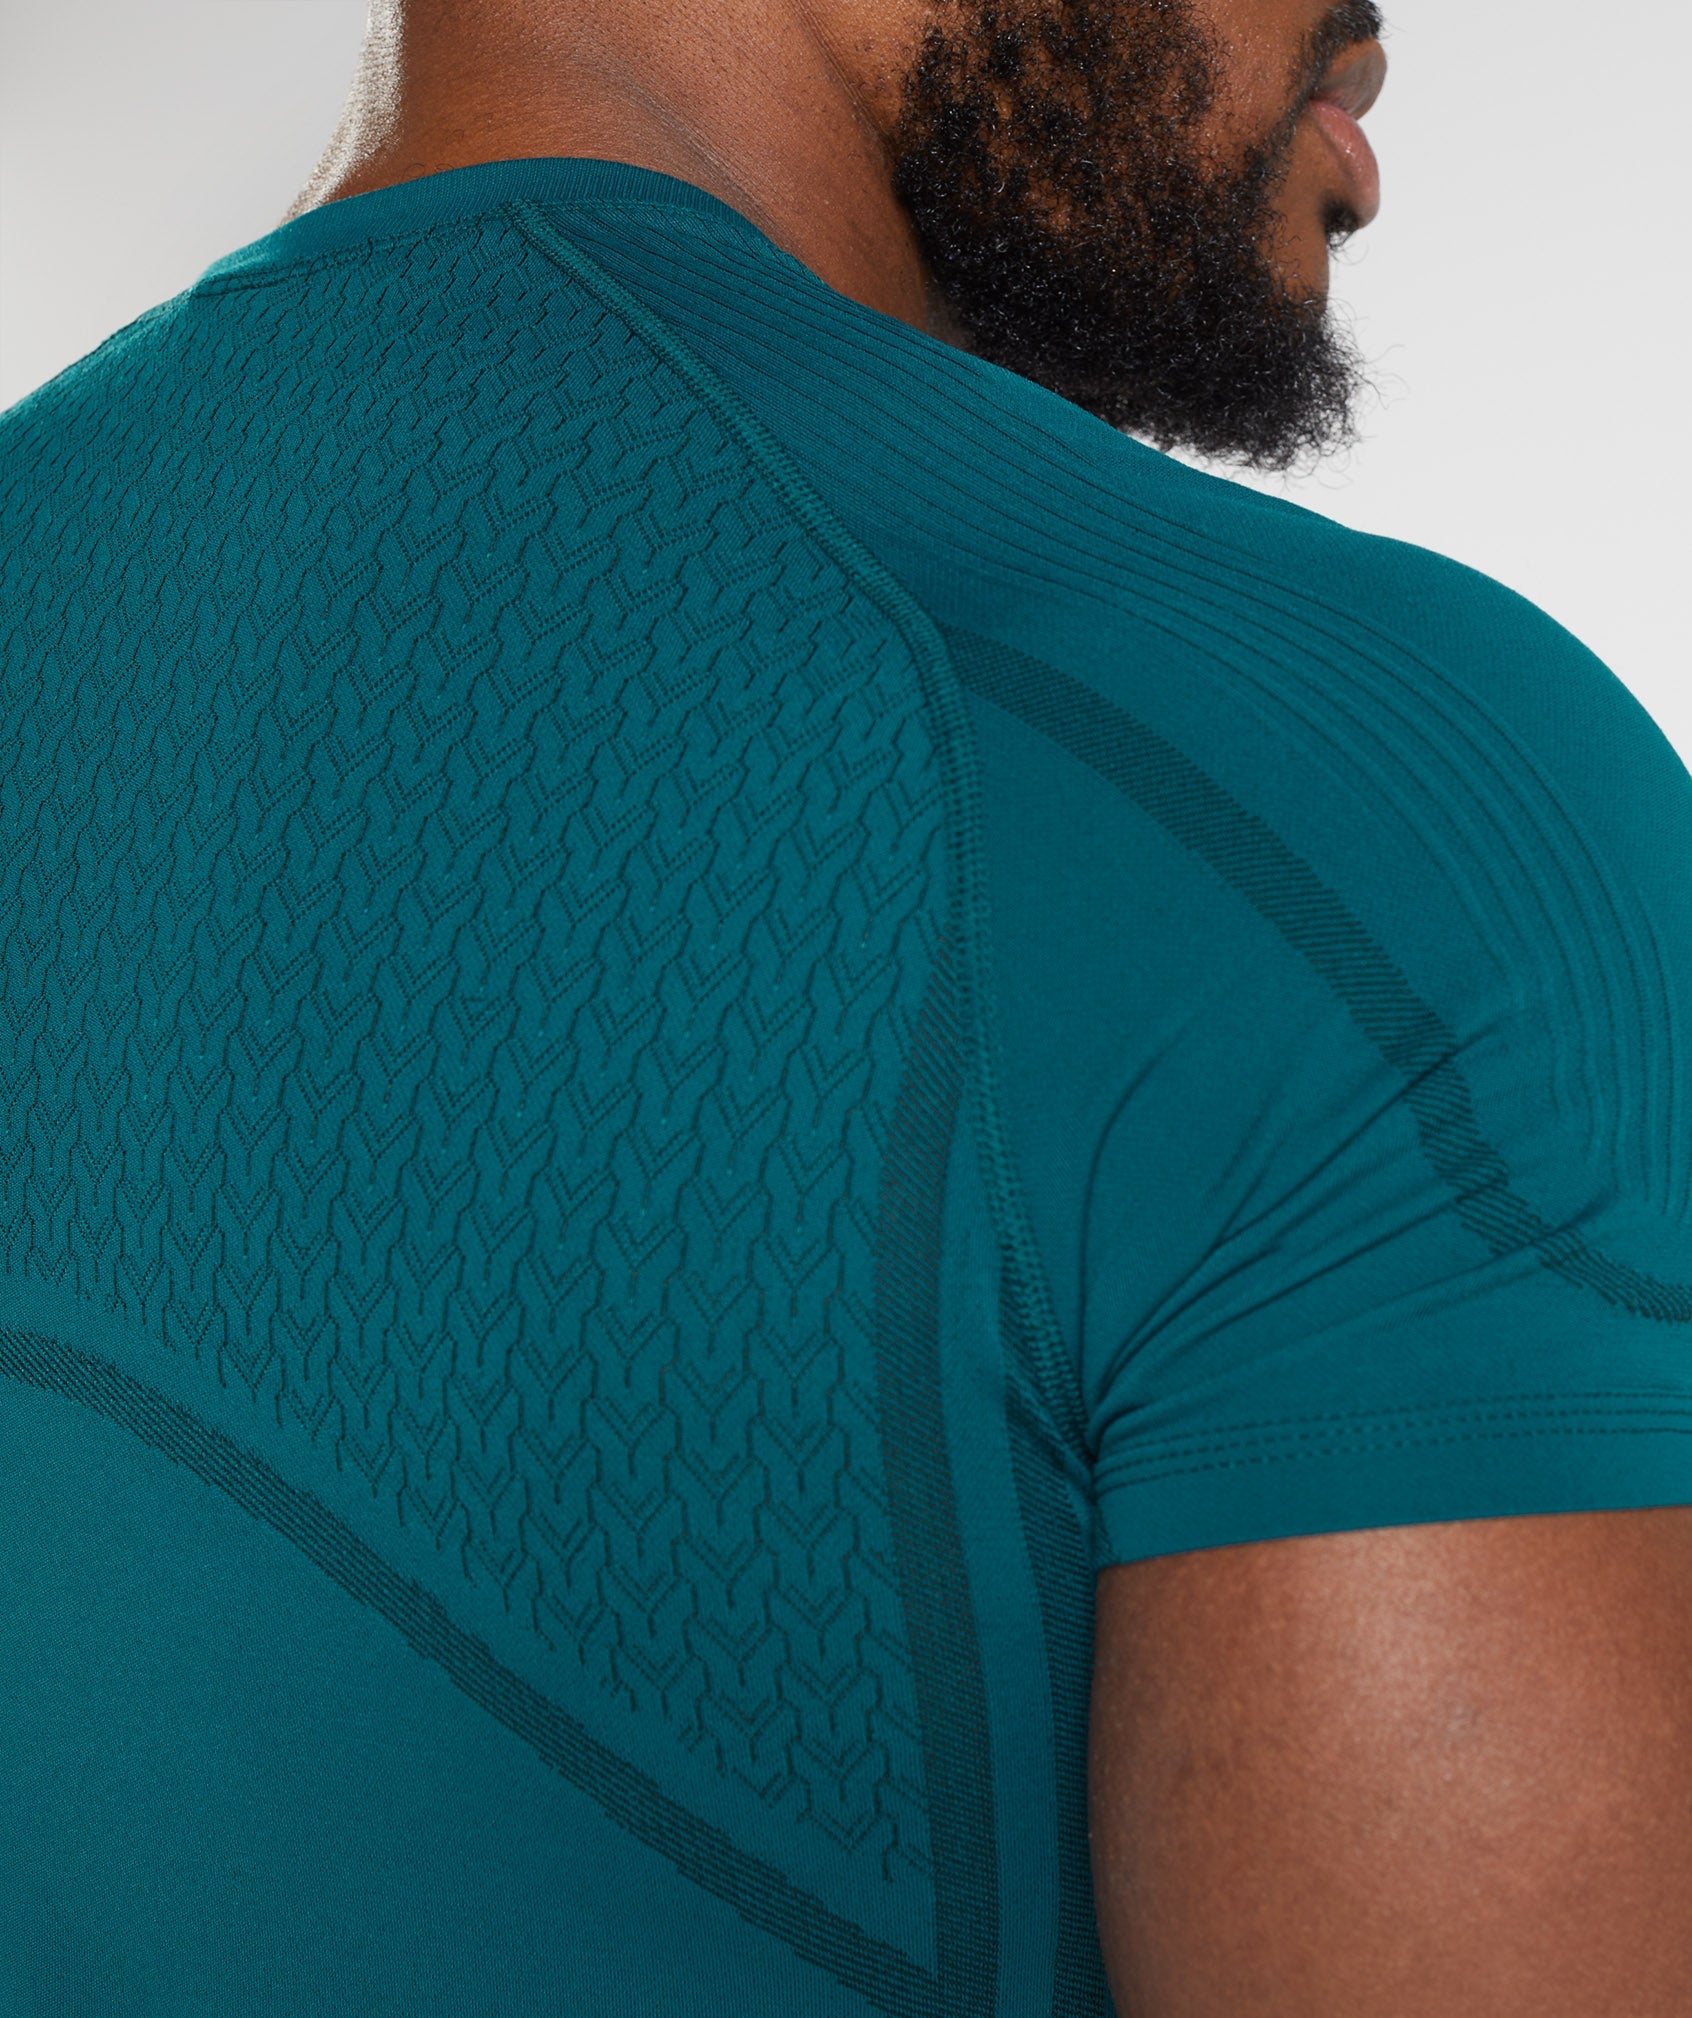 315 Seamless T-Shirt in Winter Teal/Black